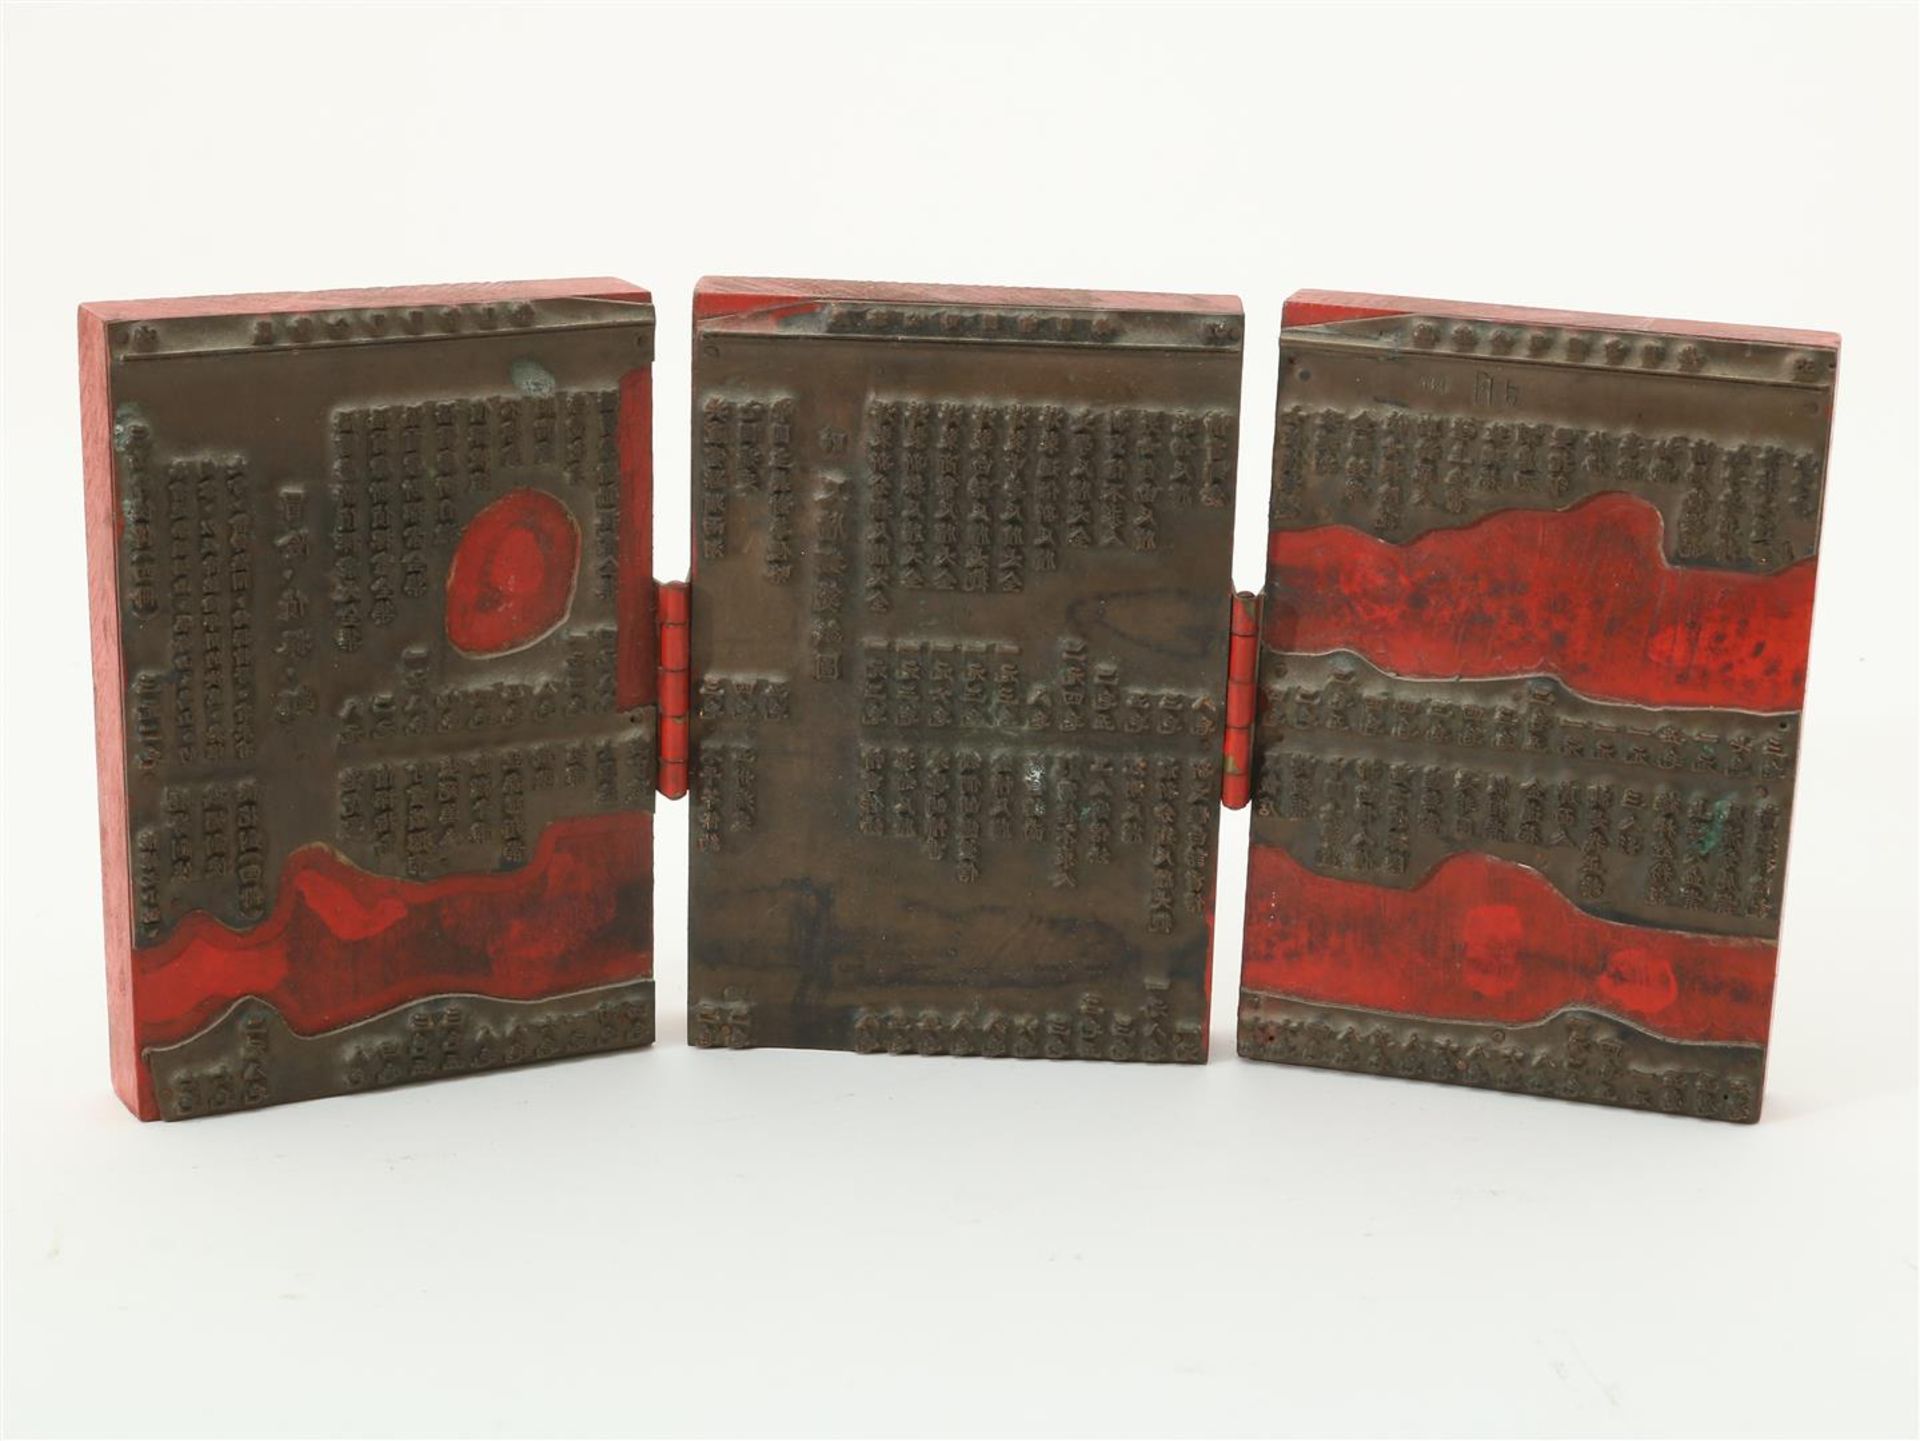 A triptych made from Chinese printing plates, stamping plates, ca. 1900, 16 x 34 cm.